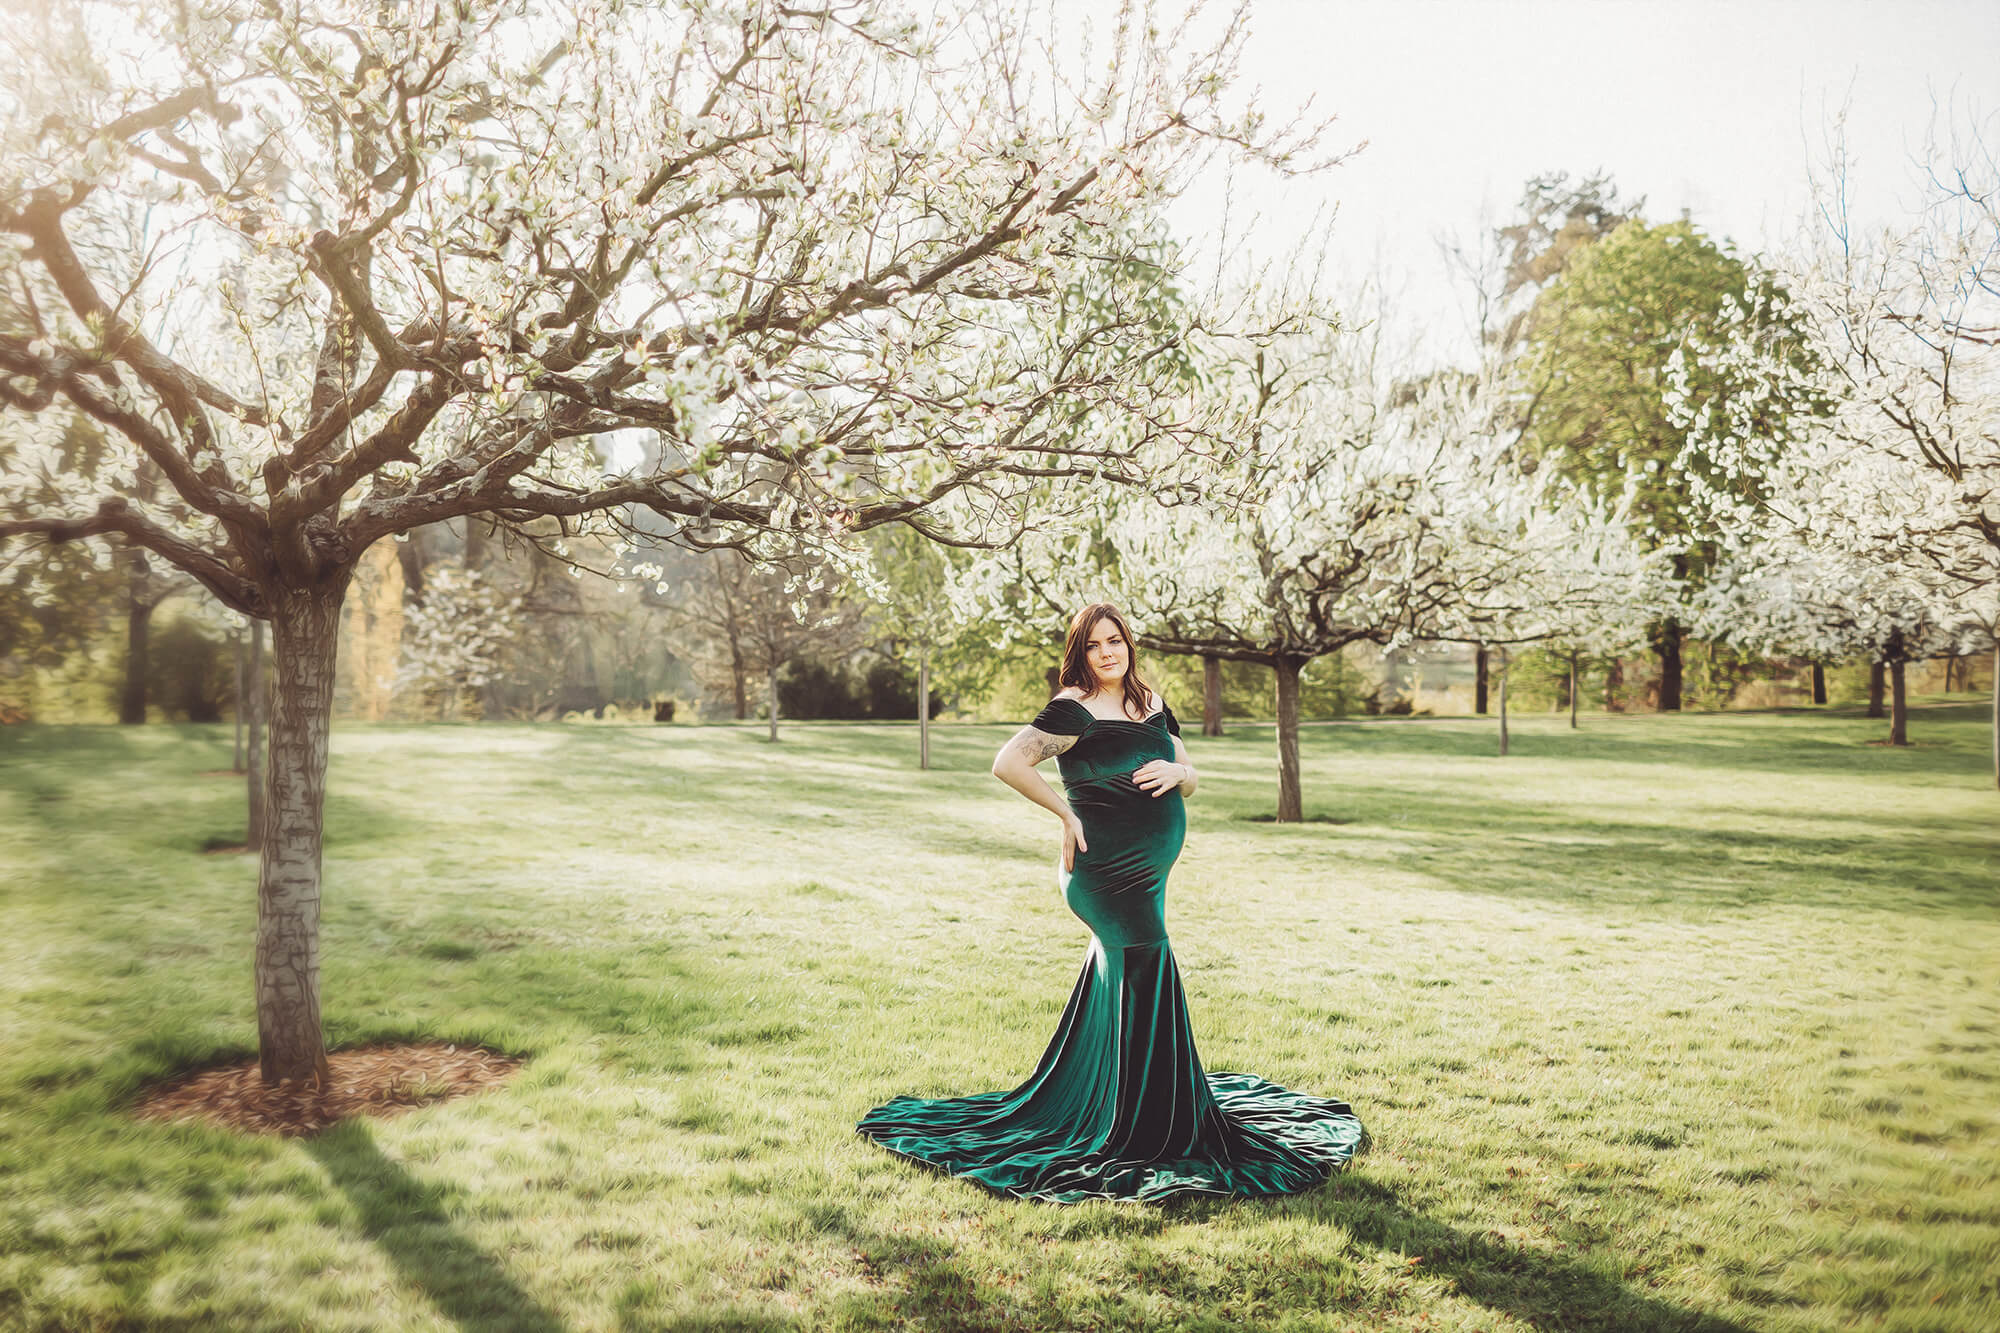 Spring trees covered in white blossoms create a beautiful backdrop for this Bad Homburg maternity session